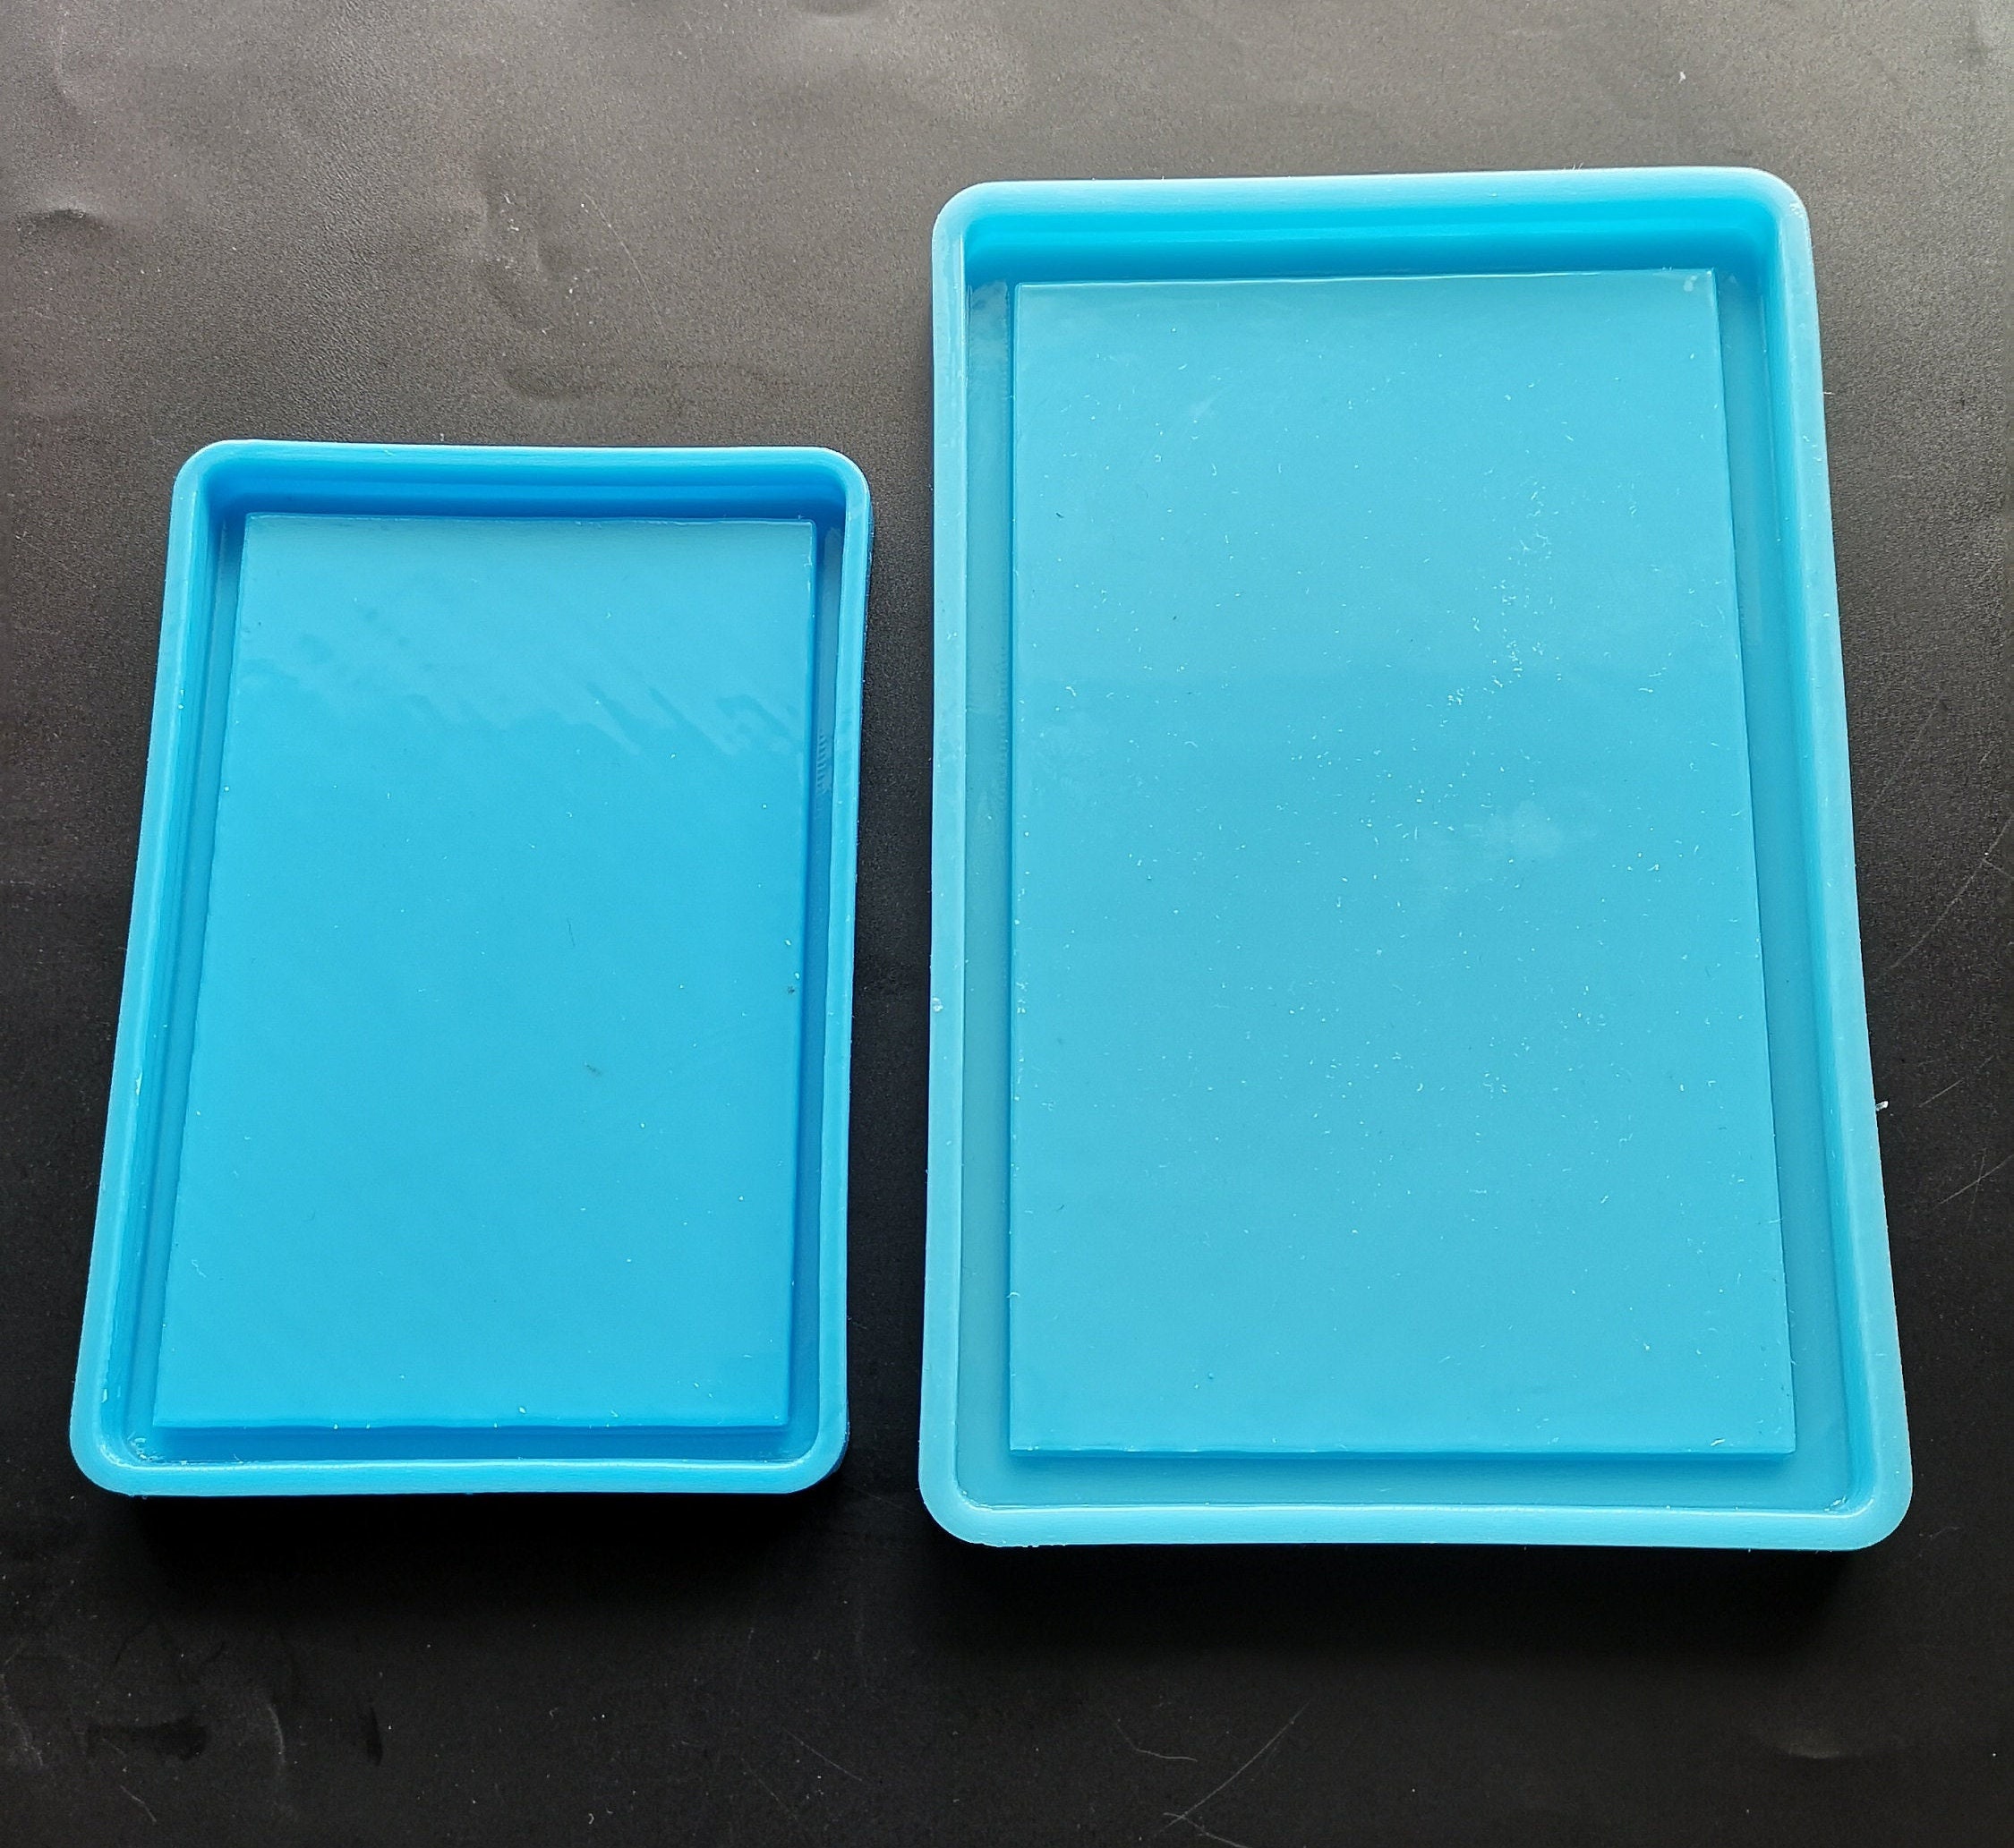 Rolling Tray Mold, Smoker Set Silicone Mold, Ashtray Resin Mold, Makeup  Rolling Tray Mold, Resin Supplies, Craft Resin 